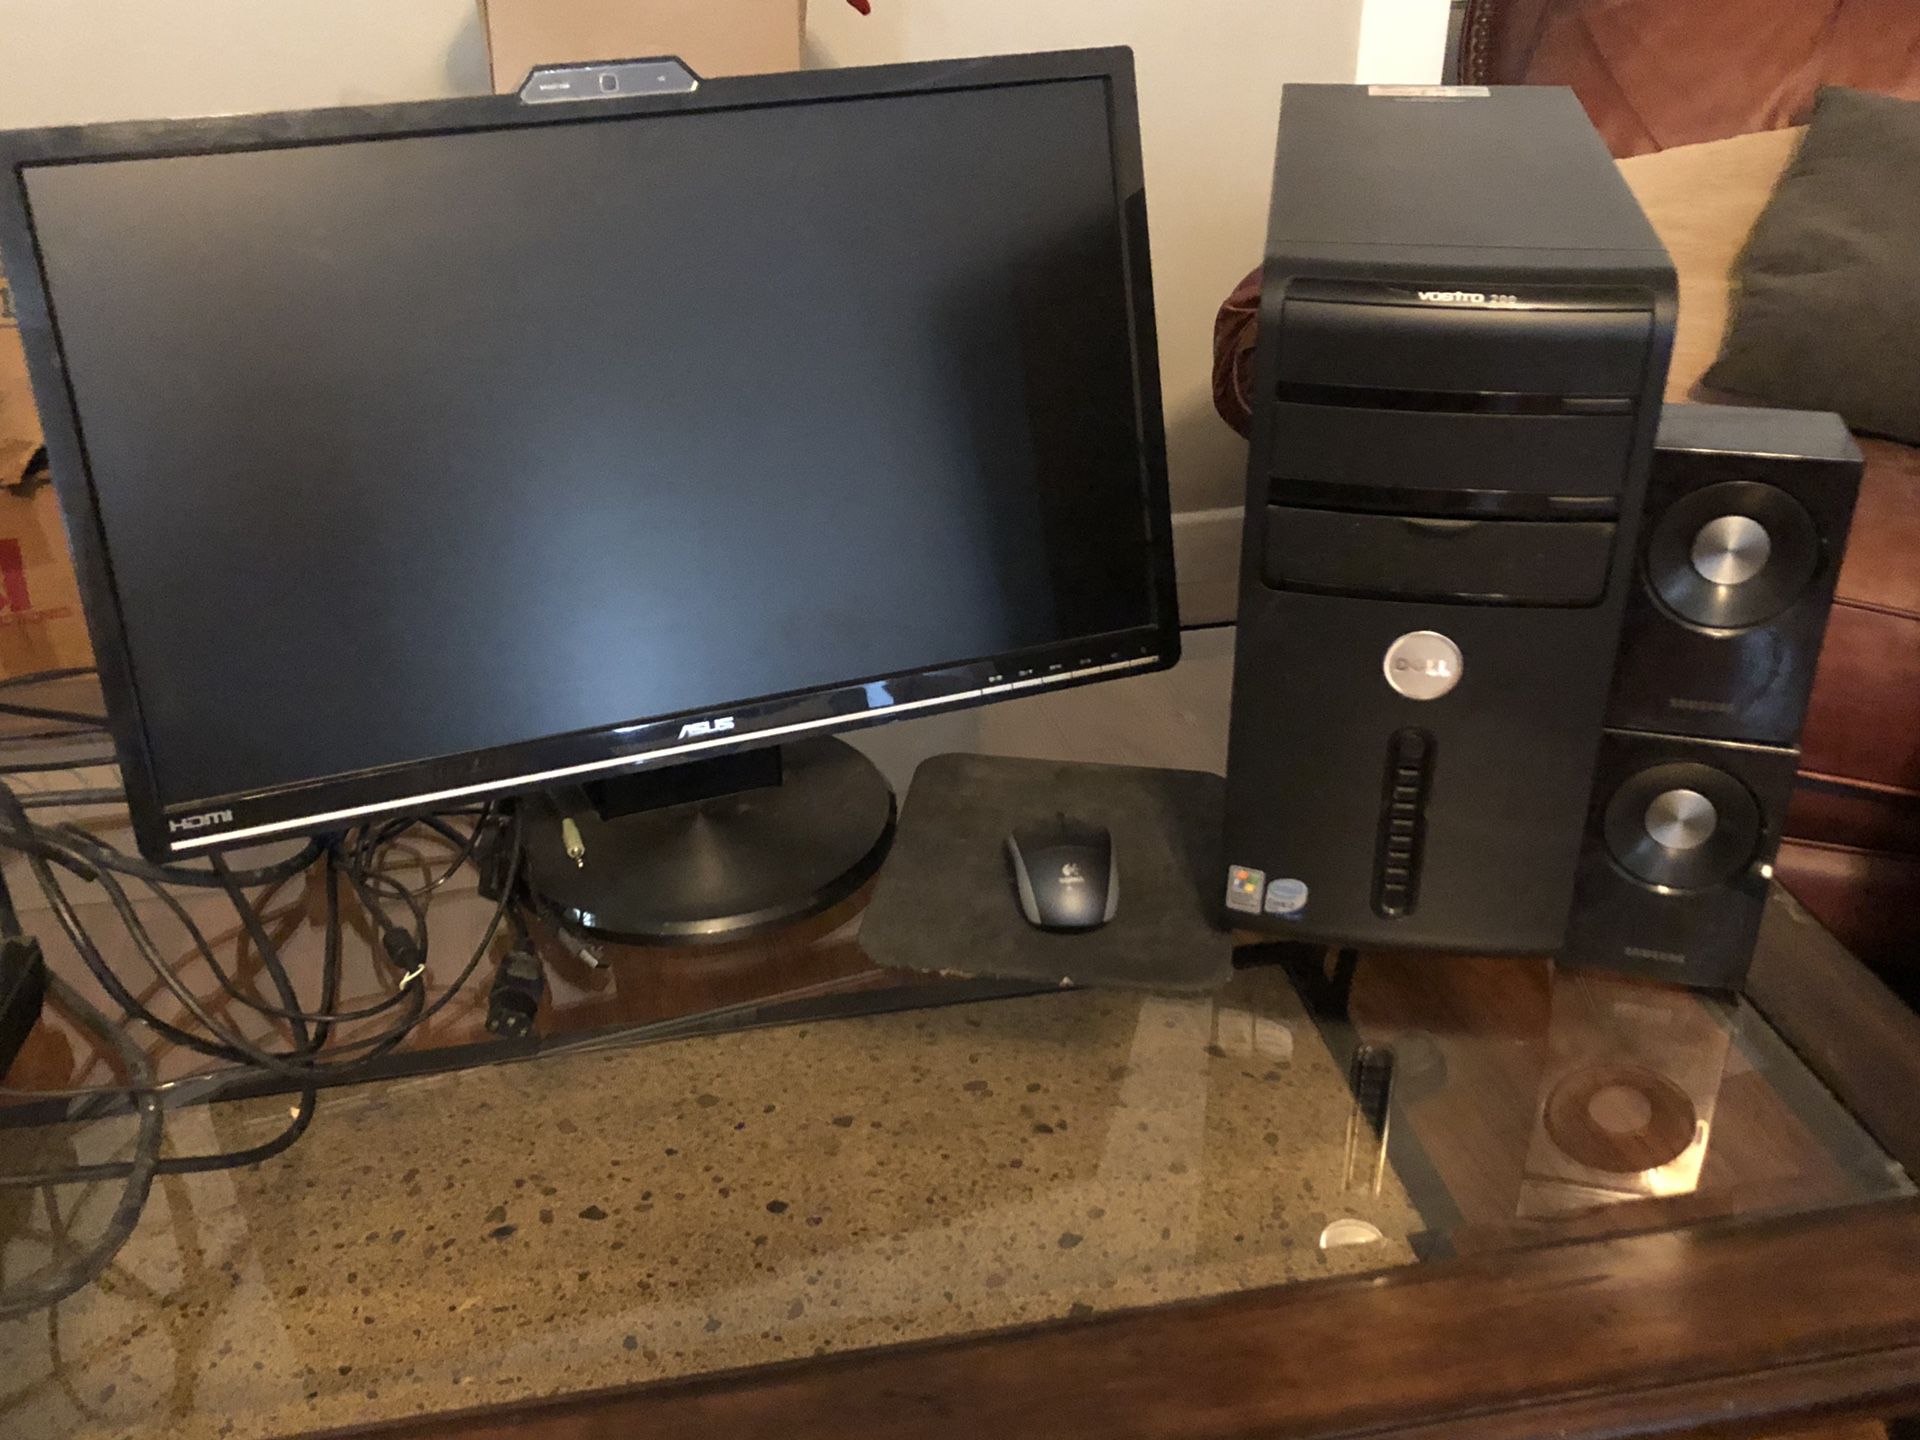 Dell Vostro 200 tower with Asus VK248 HD LCD monitor